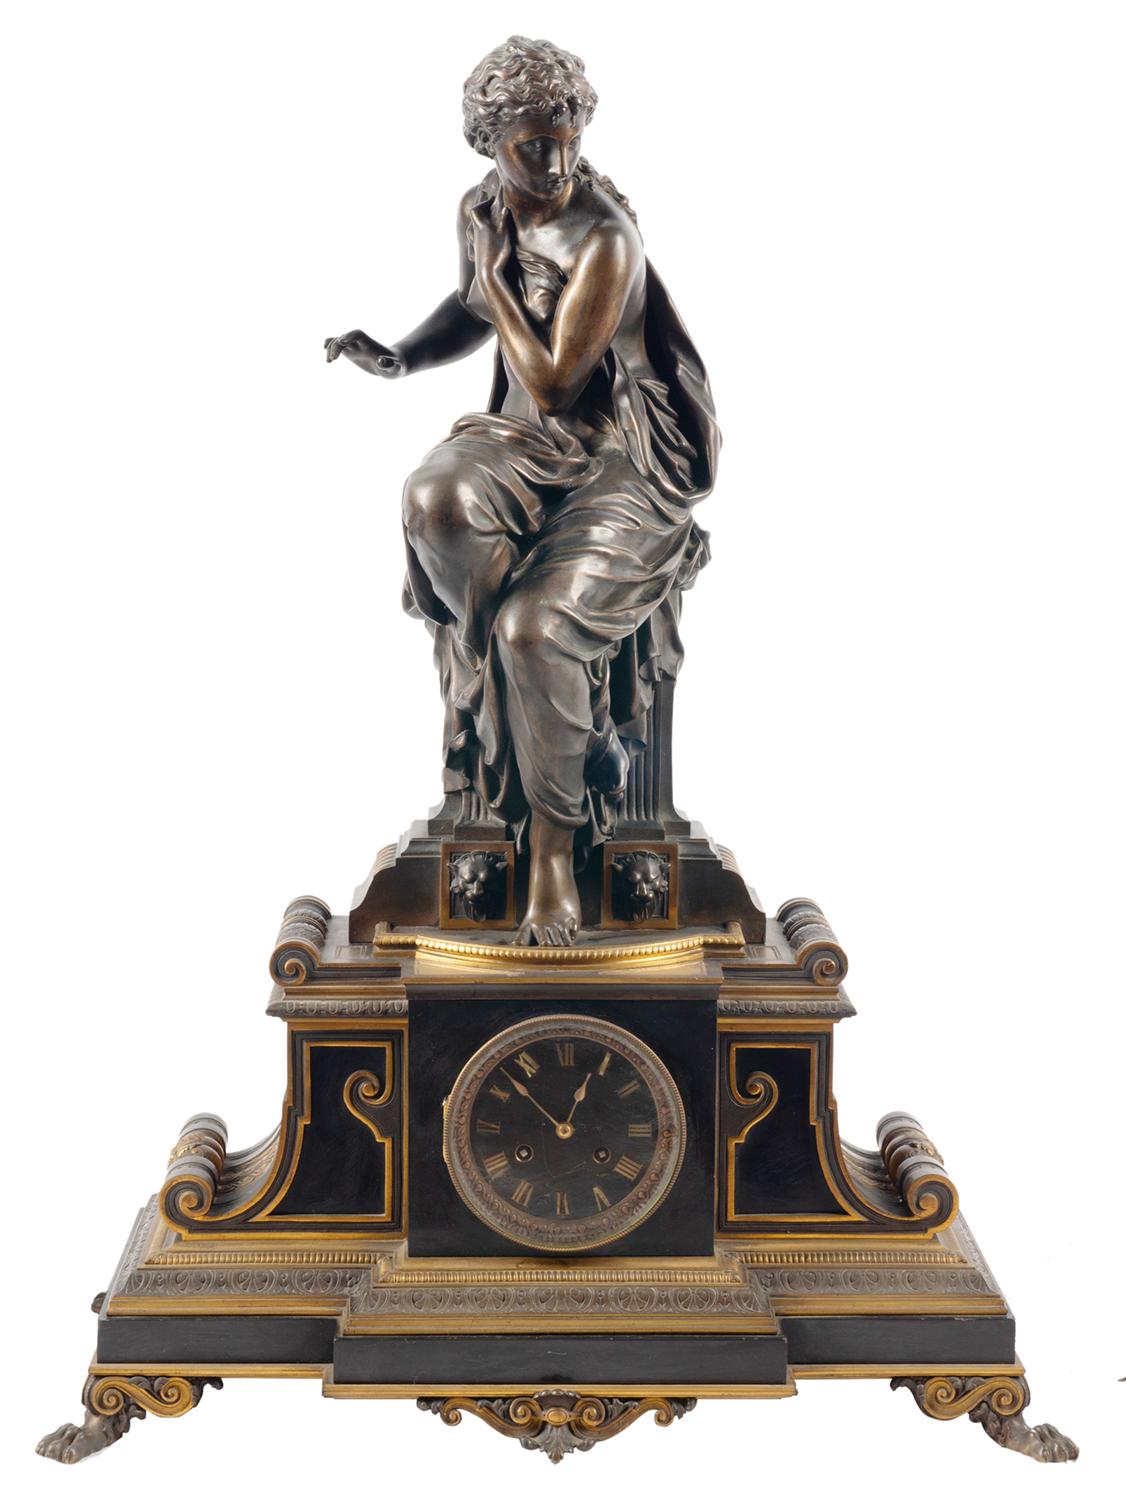 A large fine quality 19th century bronze clock garniture, signed H.Dumaige.
The clock having a seated classical maiden above an ormolu-mounted Belgium black marble case with an eight day chiming movement, raised on gilded claw feet.
The pair of